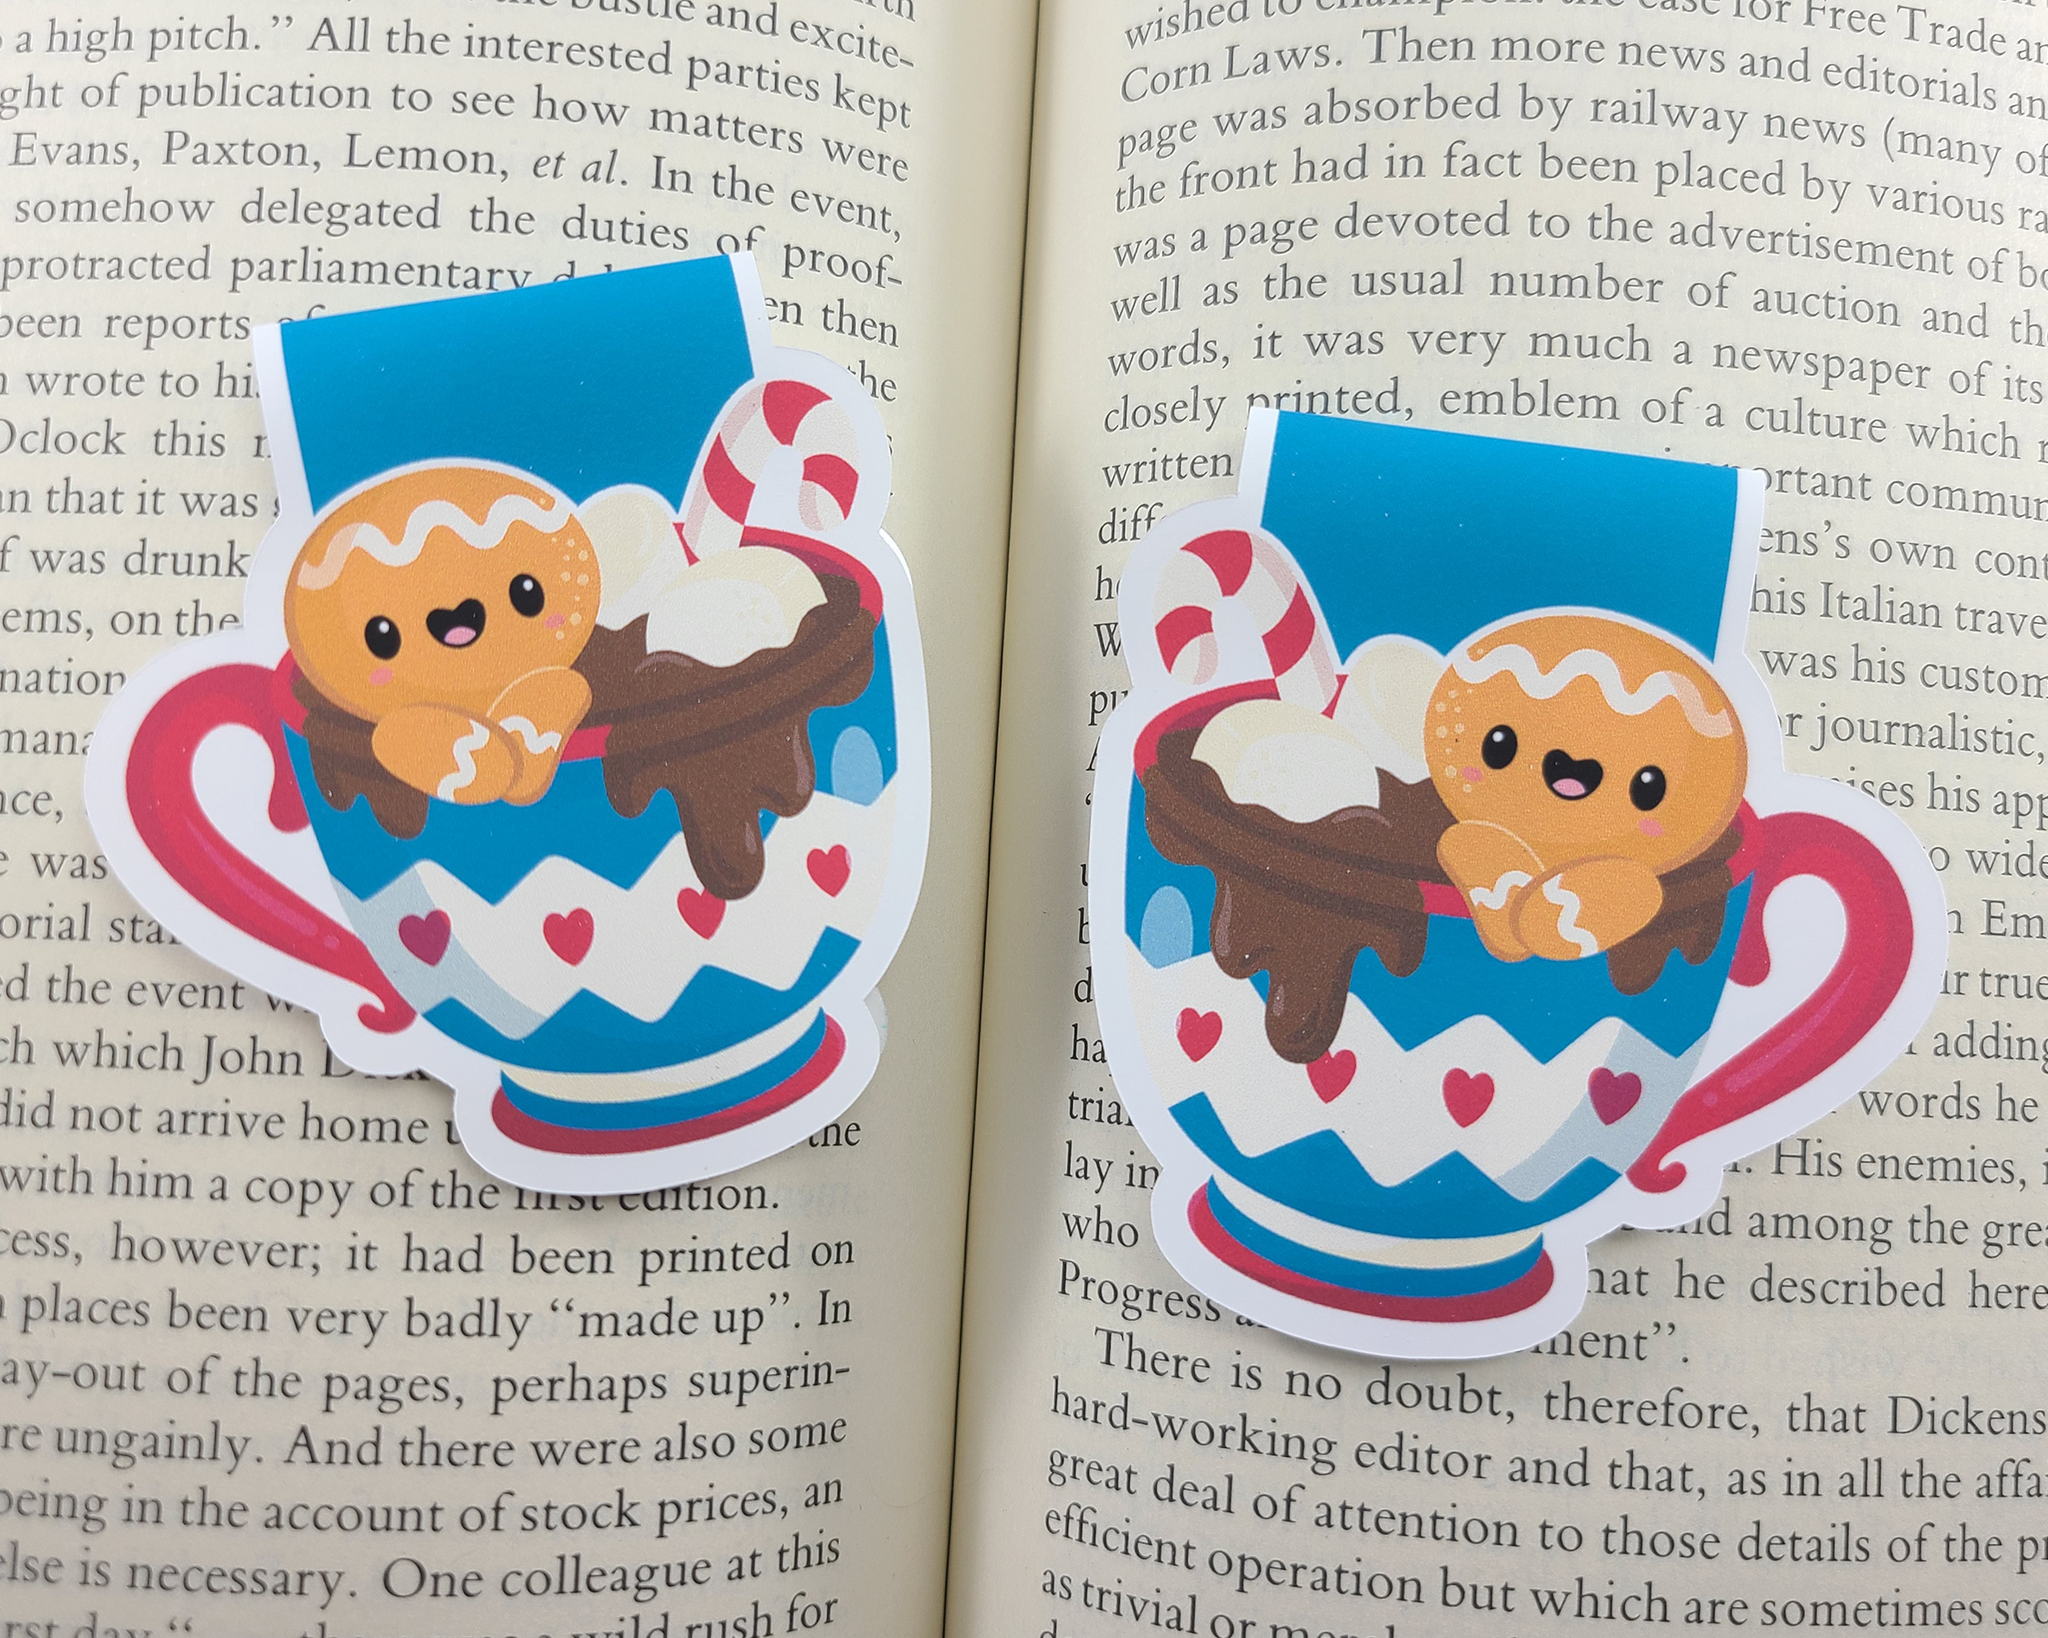 Cocoa Gingerbread Magnetic Bookmark